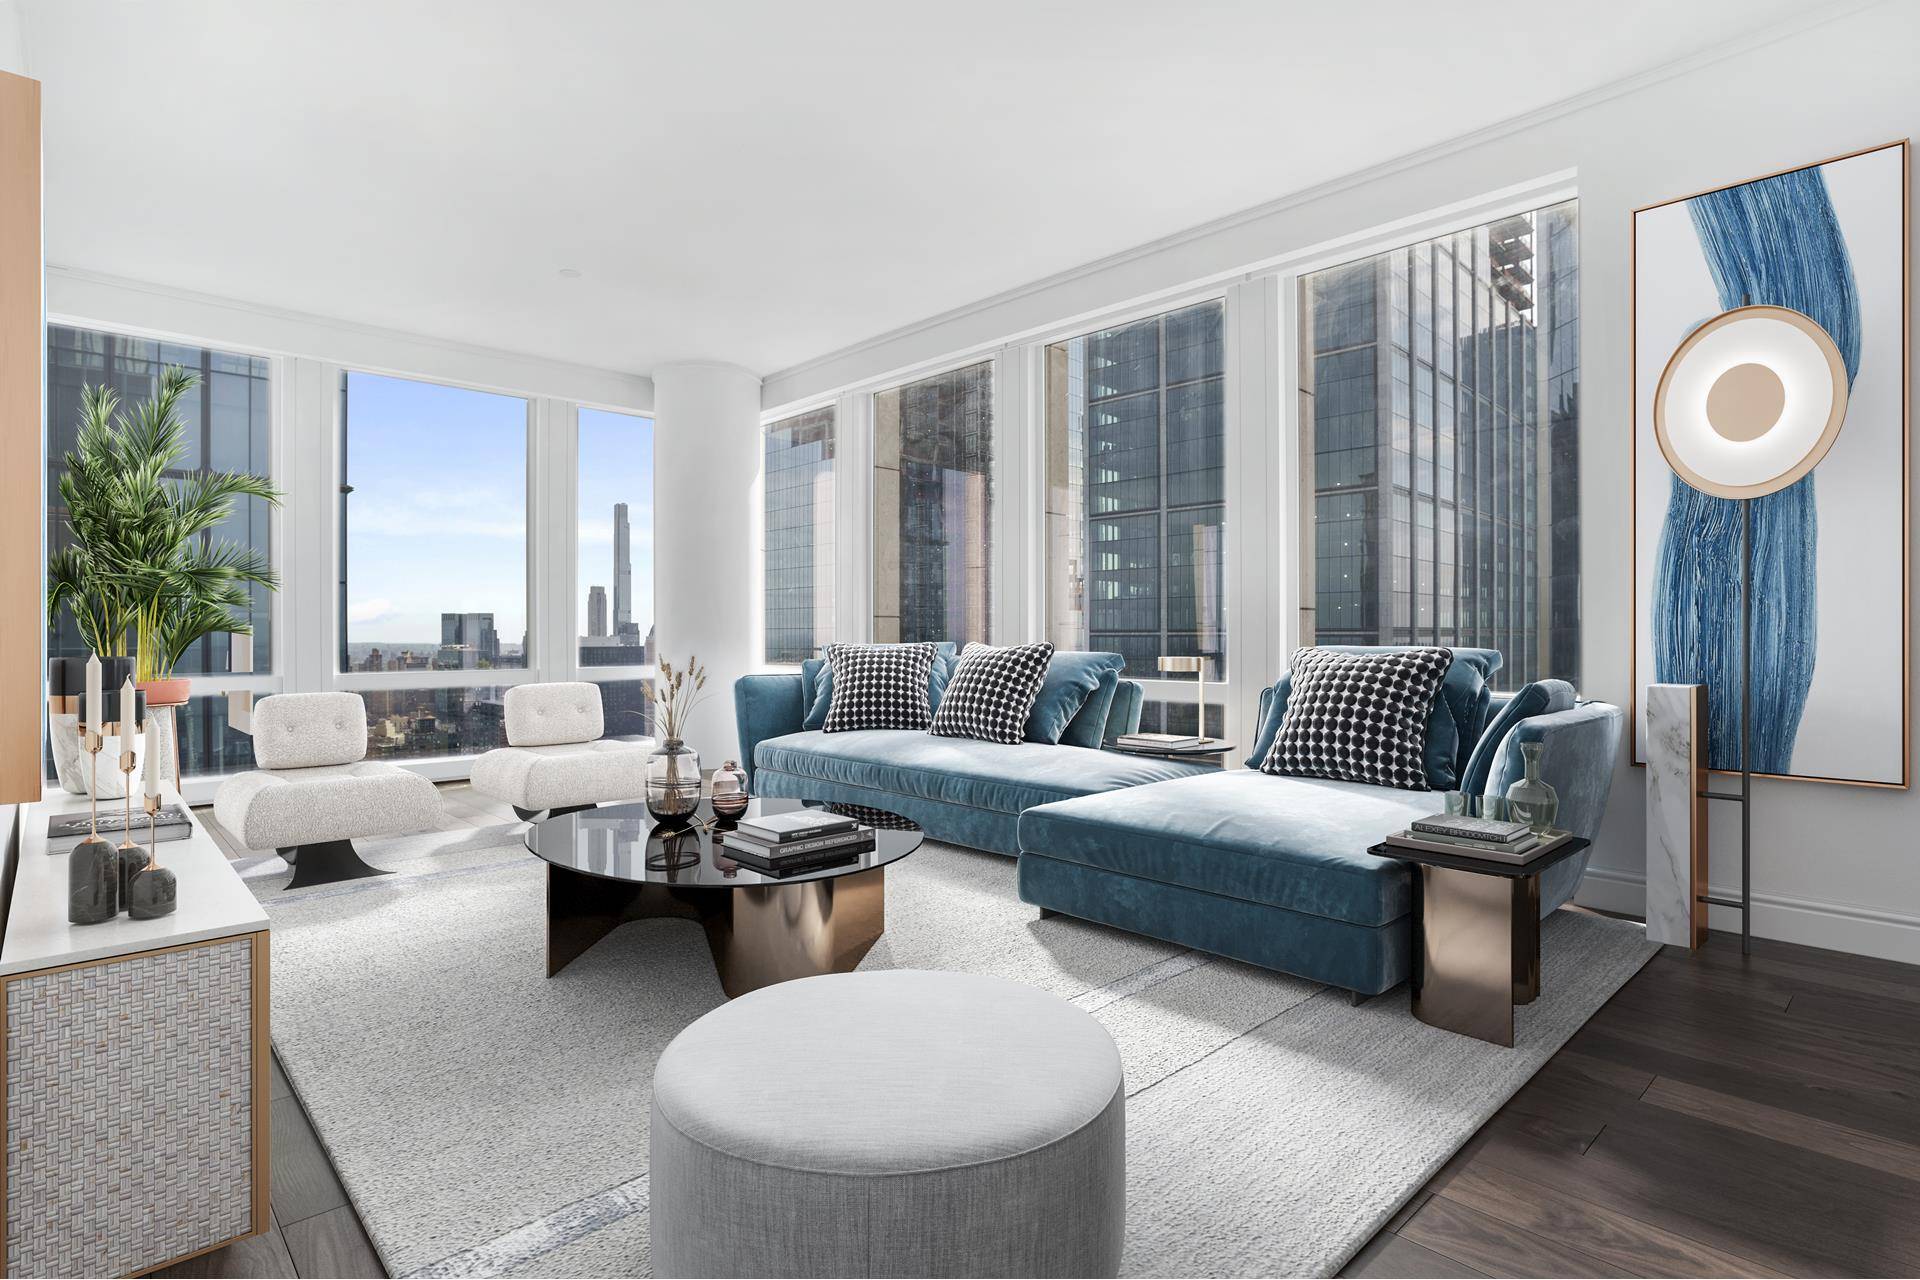 Why unit 6803 Standing at the corner of the living room, you can enjoy Manhattans skyline, Hudson river and the Hudson Yards garden views ; Open and windowed kitchen with ...